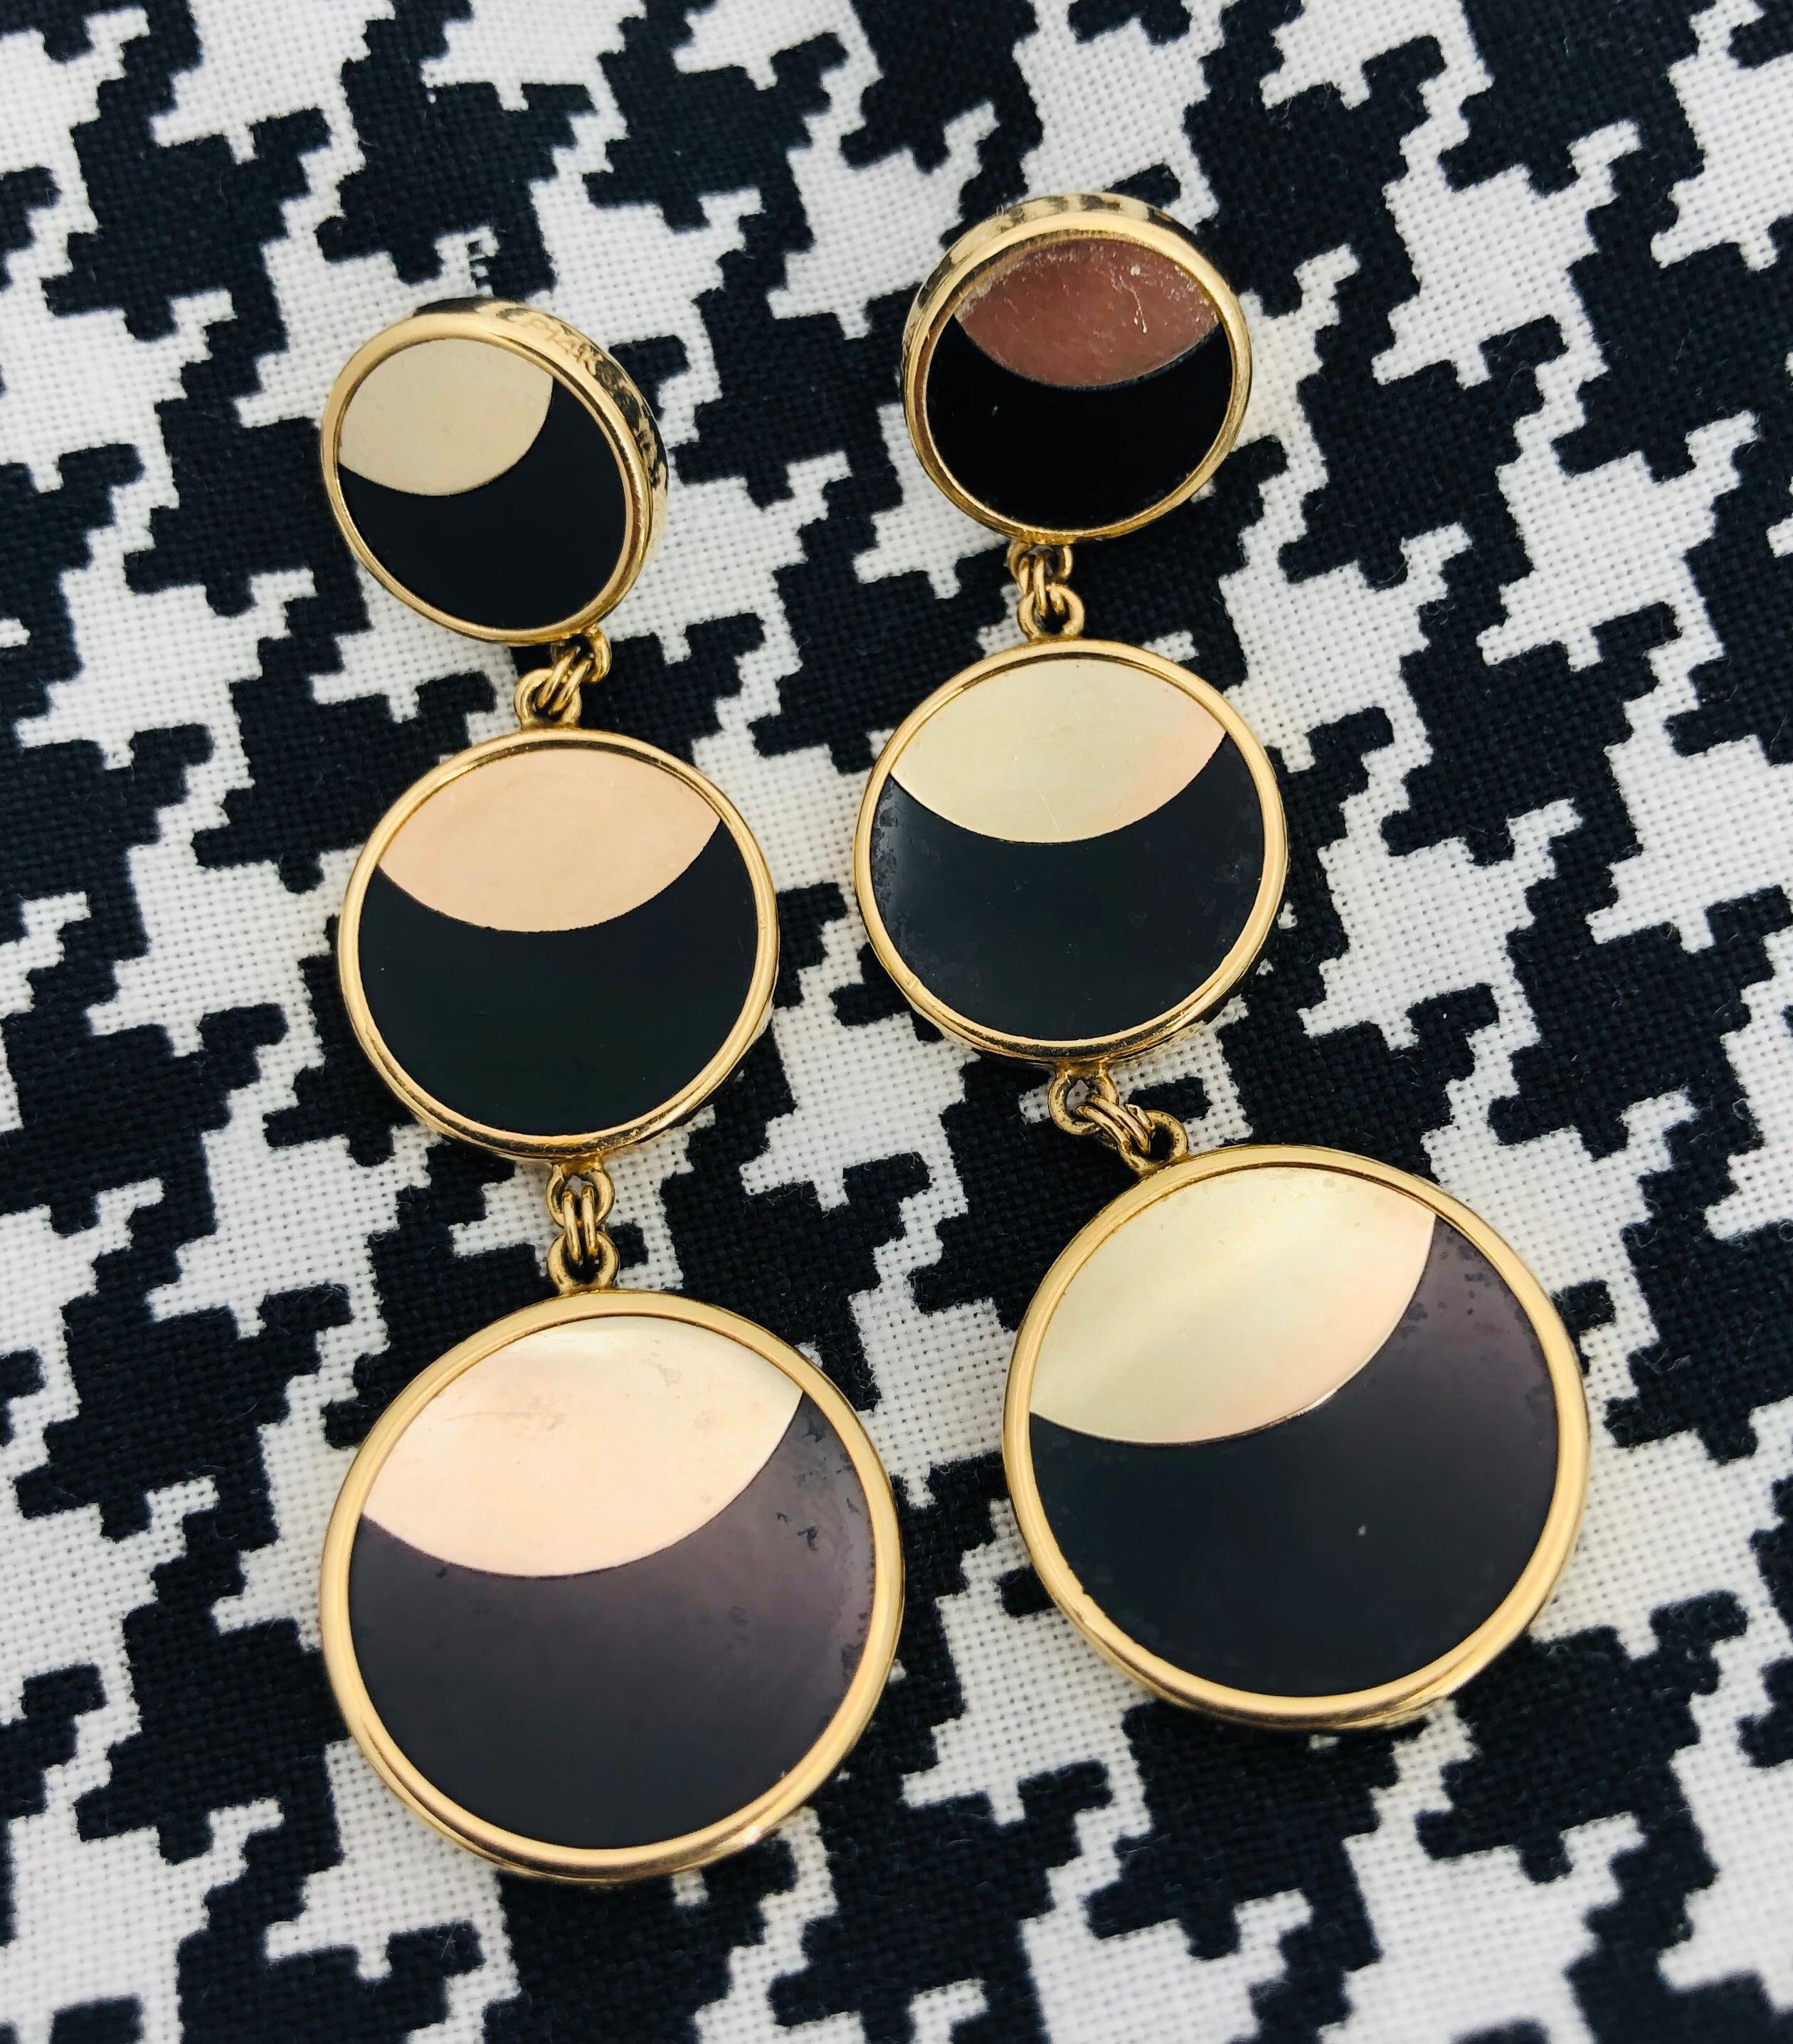 Modernist Yellow Gold Hanging Earrings with Onyx and Modern Design